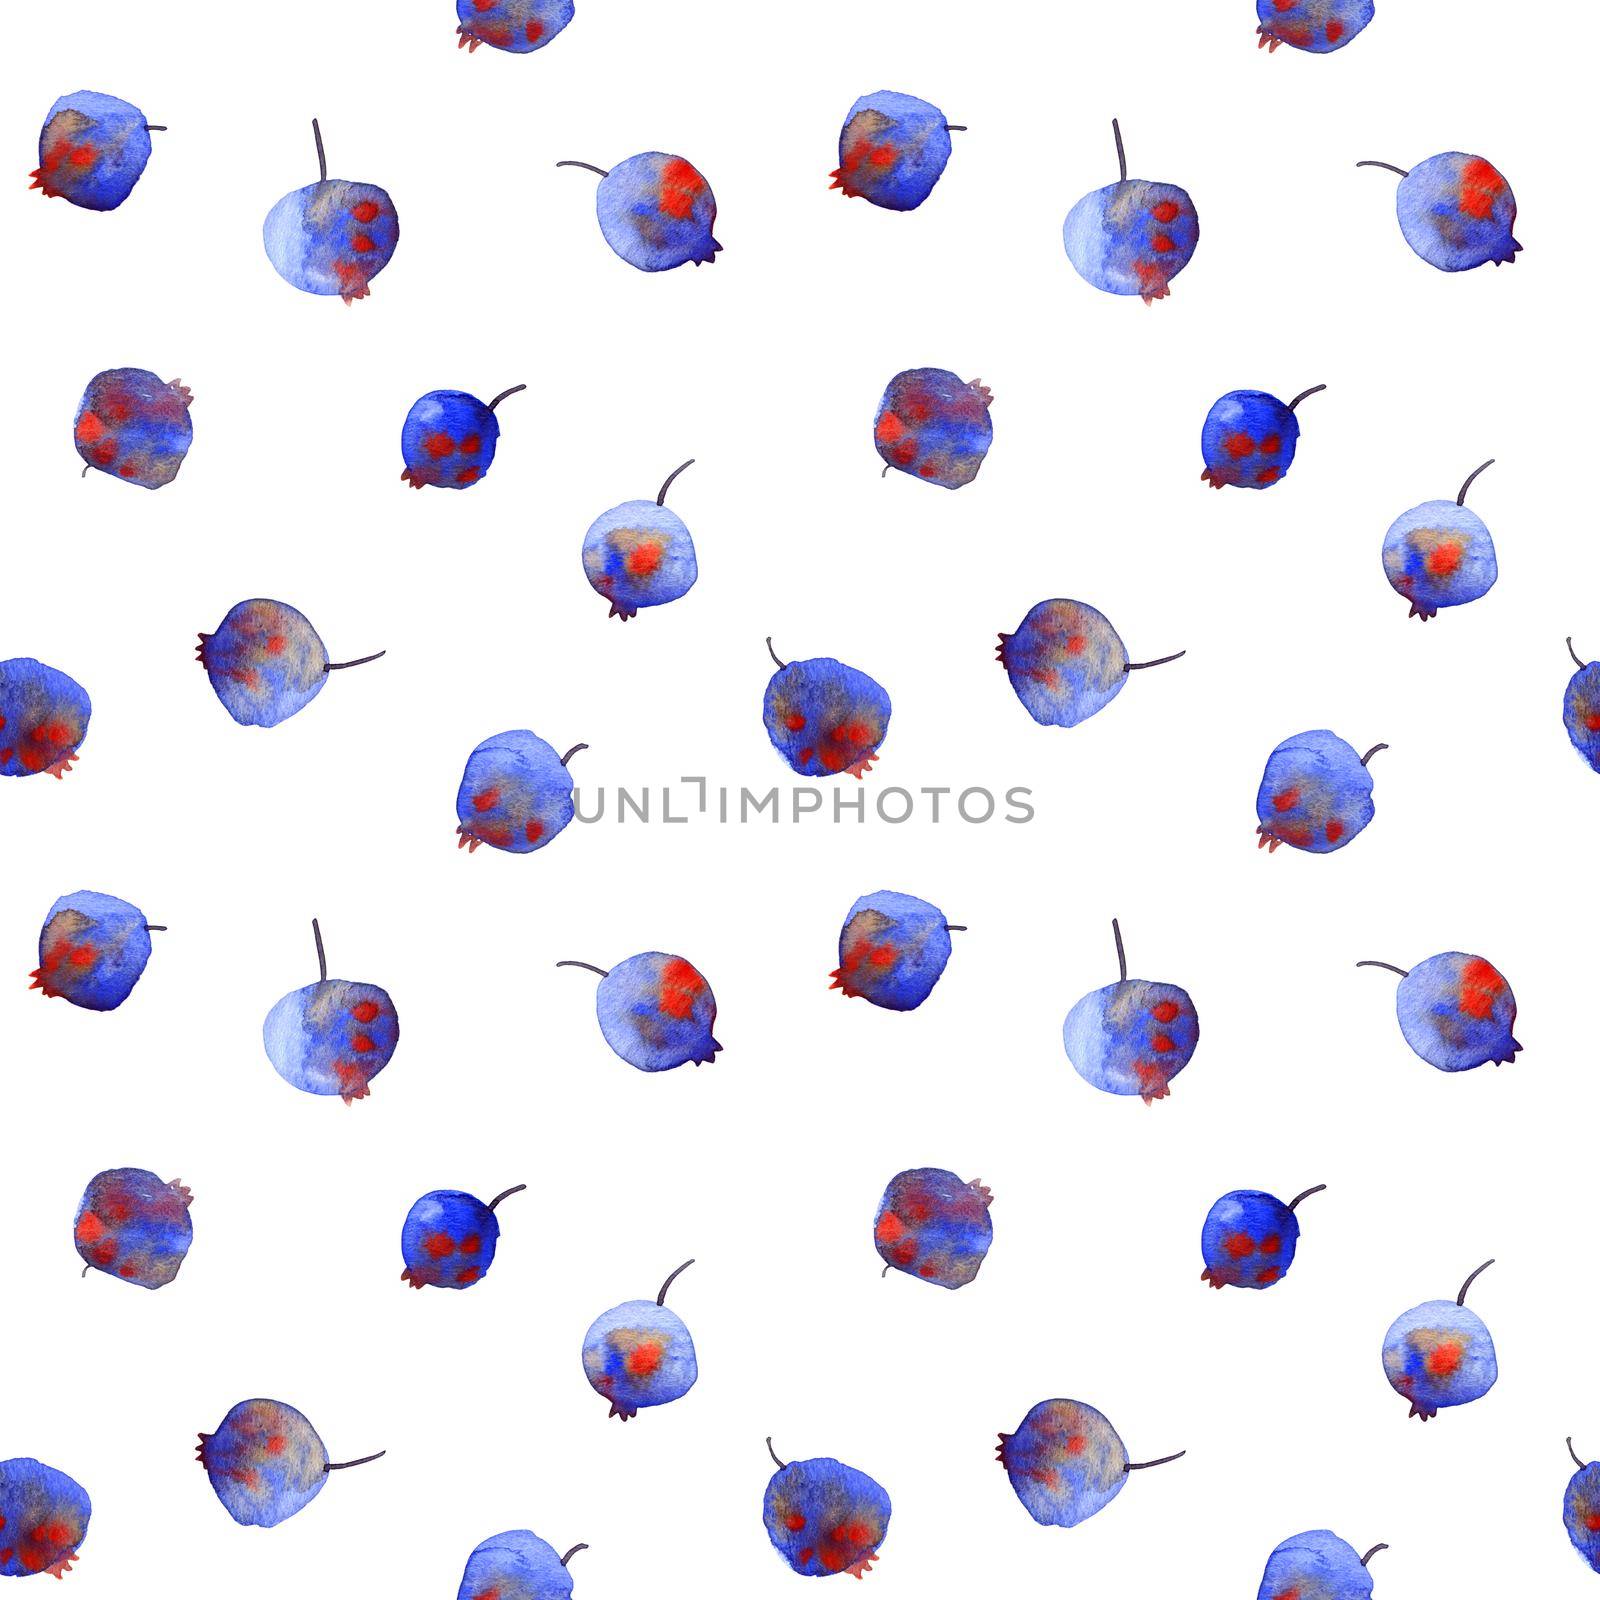 Watercolor illustration of blueberries - seamless pattern